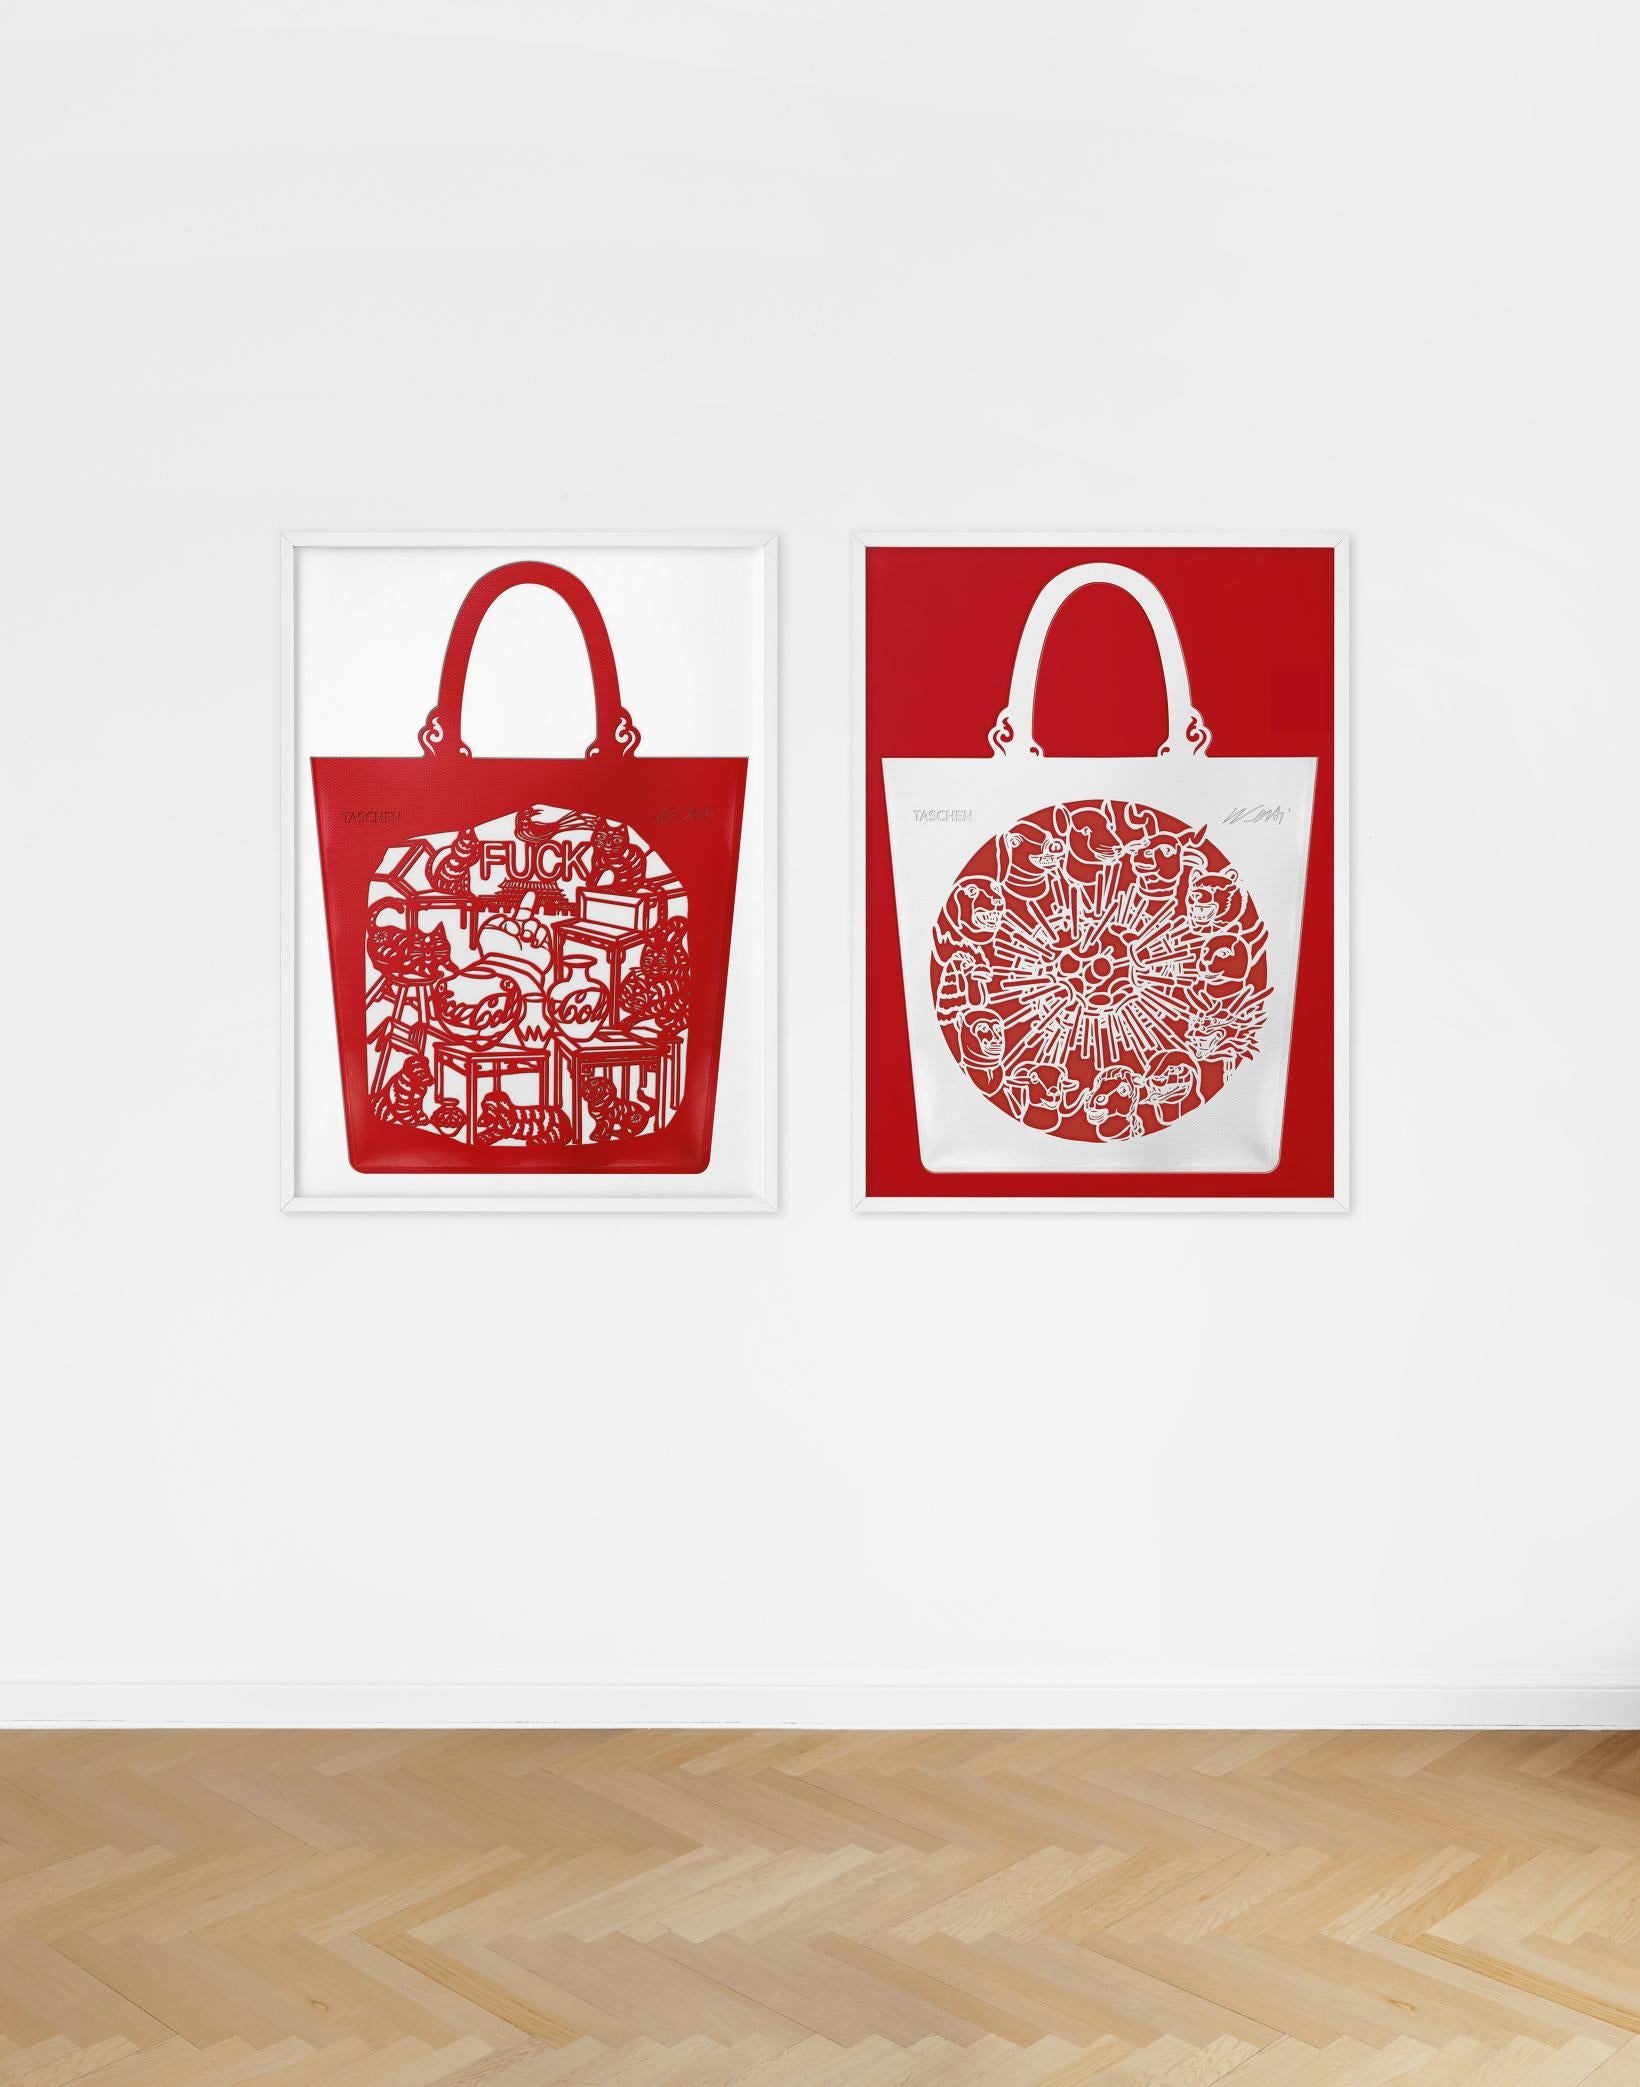 Papercutting is a traditional Chinese art going back 2,000 years. The colored, intricately cut papers are used as a story-telling medium in festivities, for prayers, and as everyday decoration. The red bag takes its motif from a papercut created by